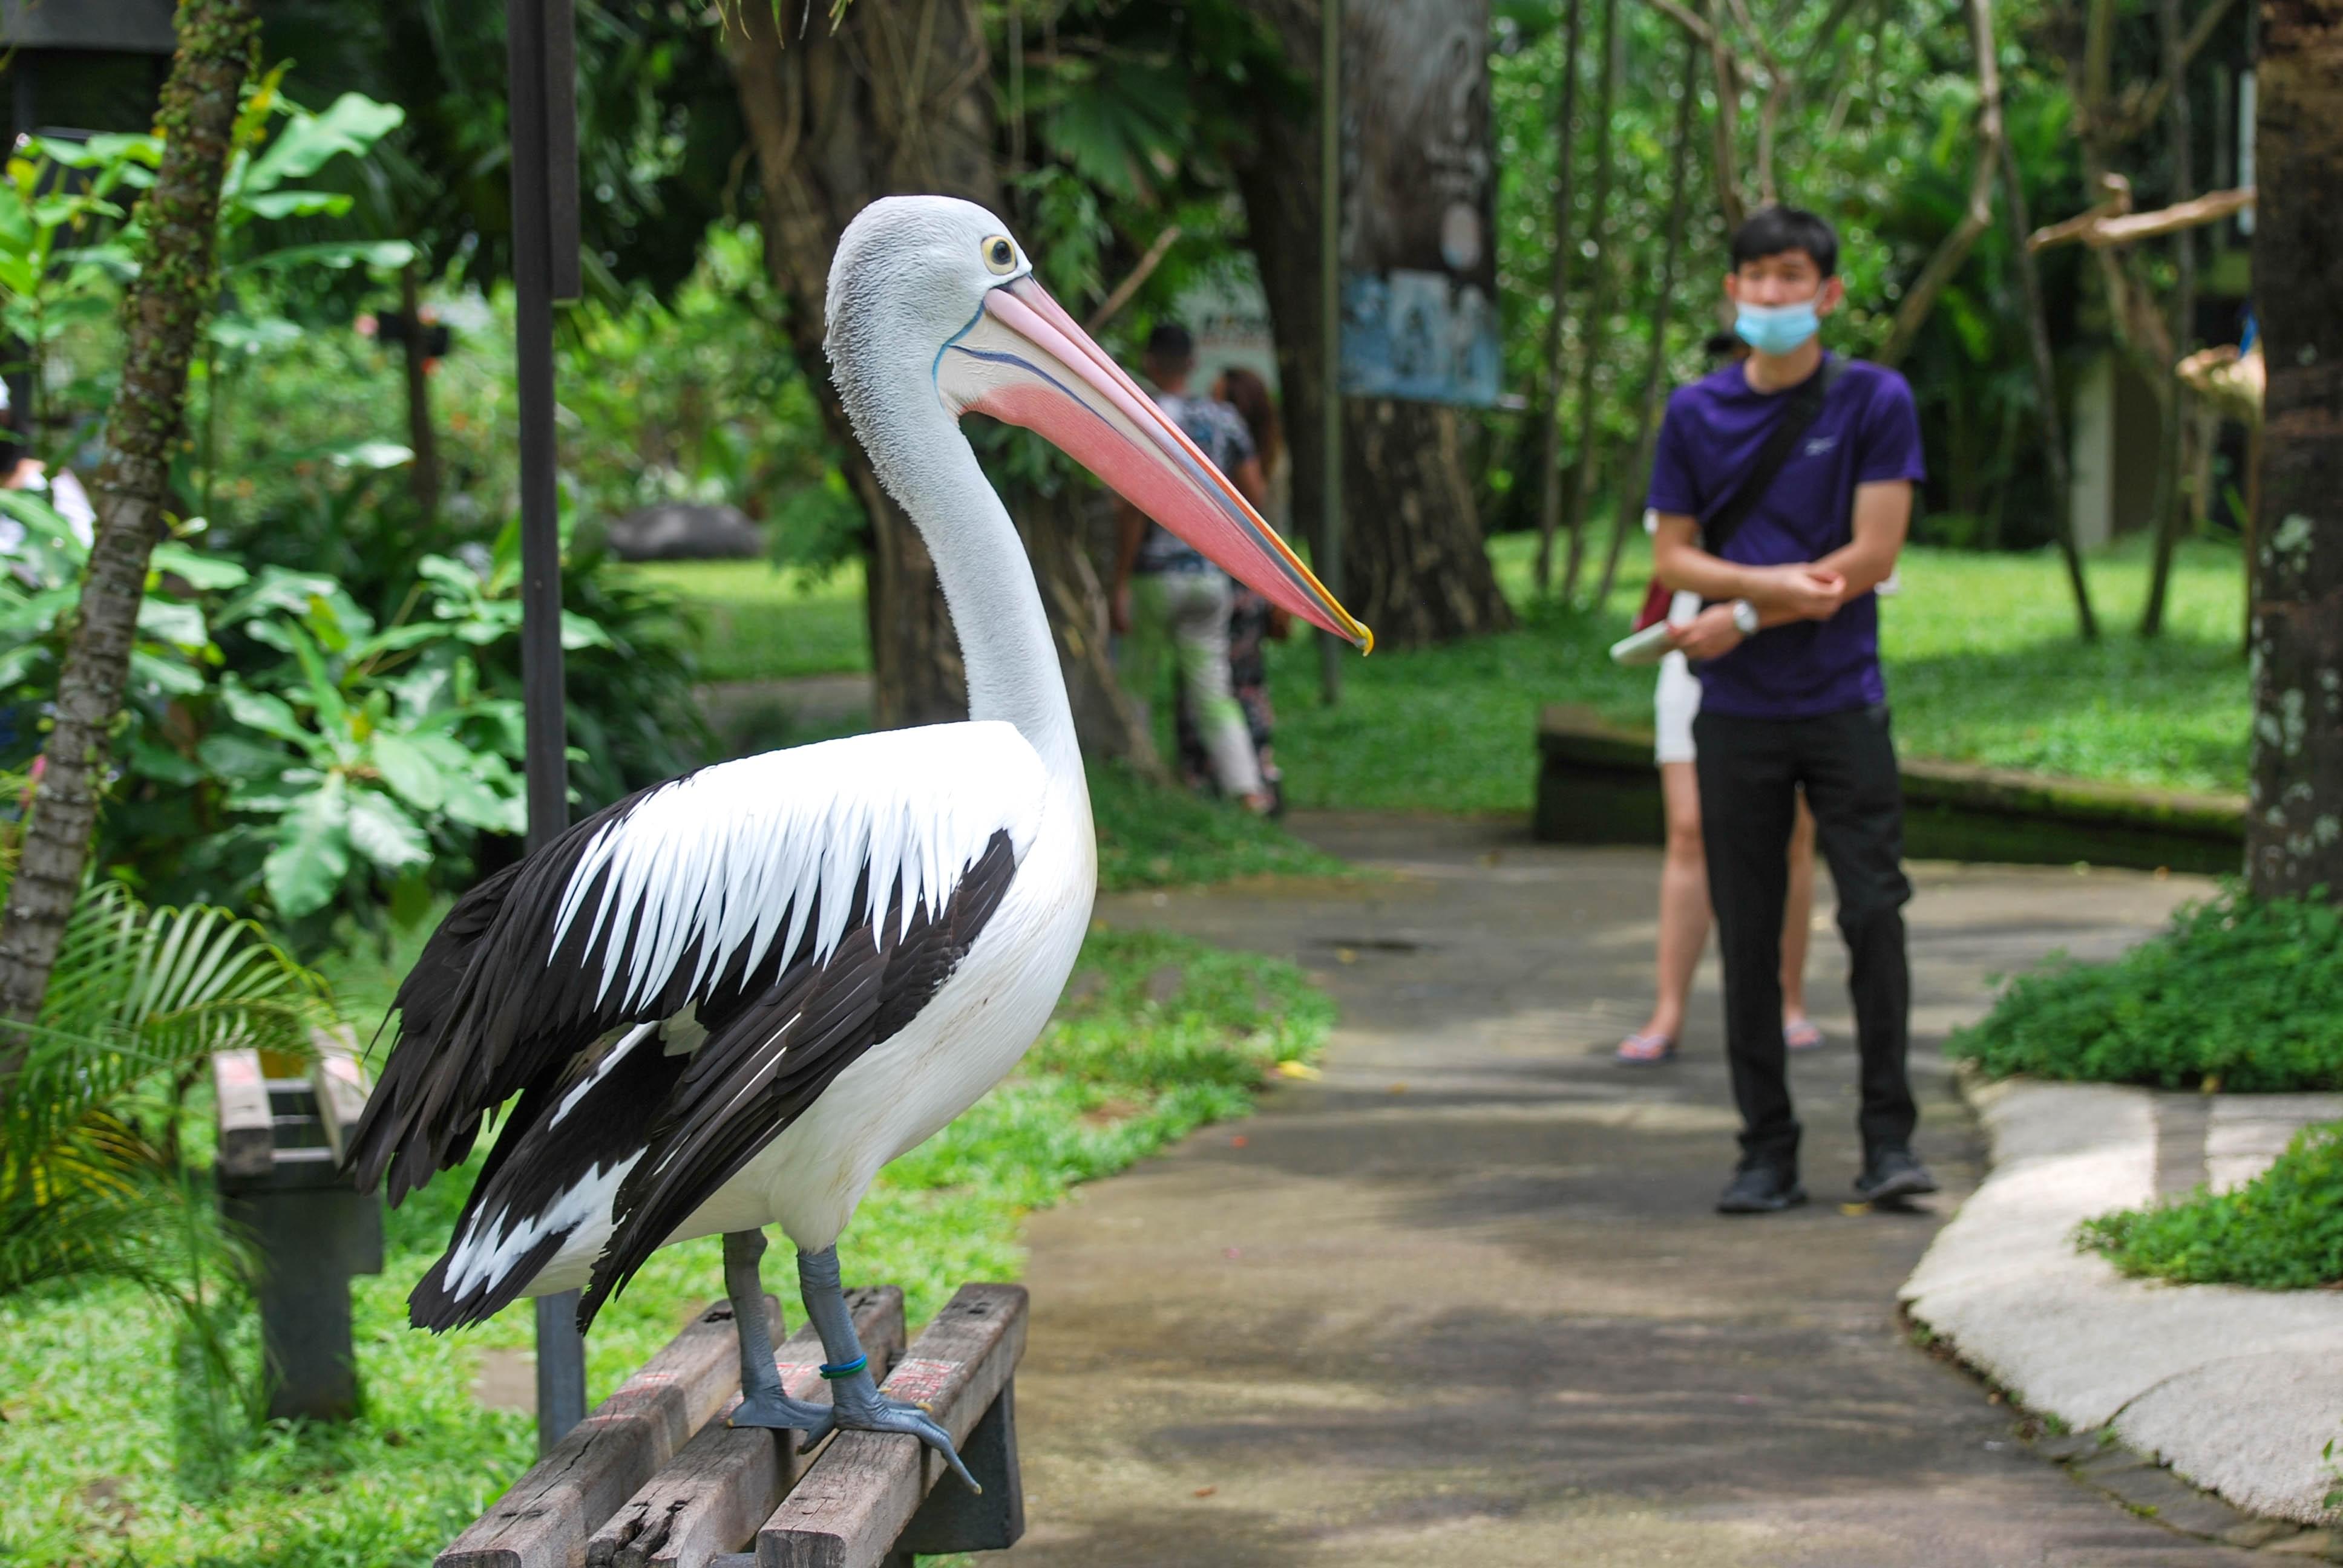 Attend the Pelican Feeding Show